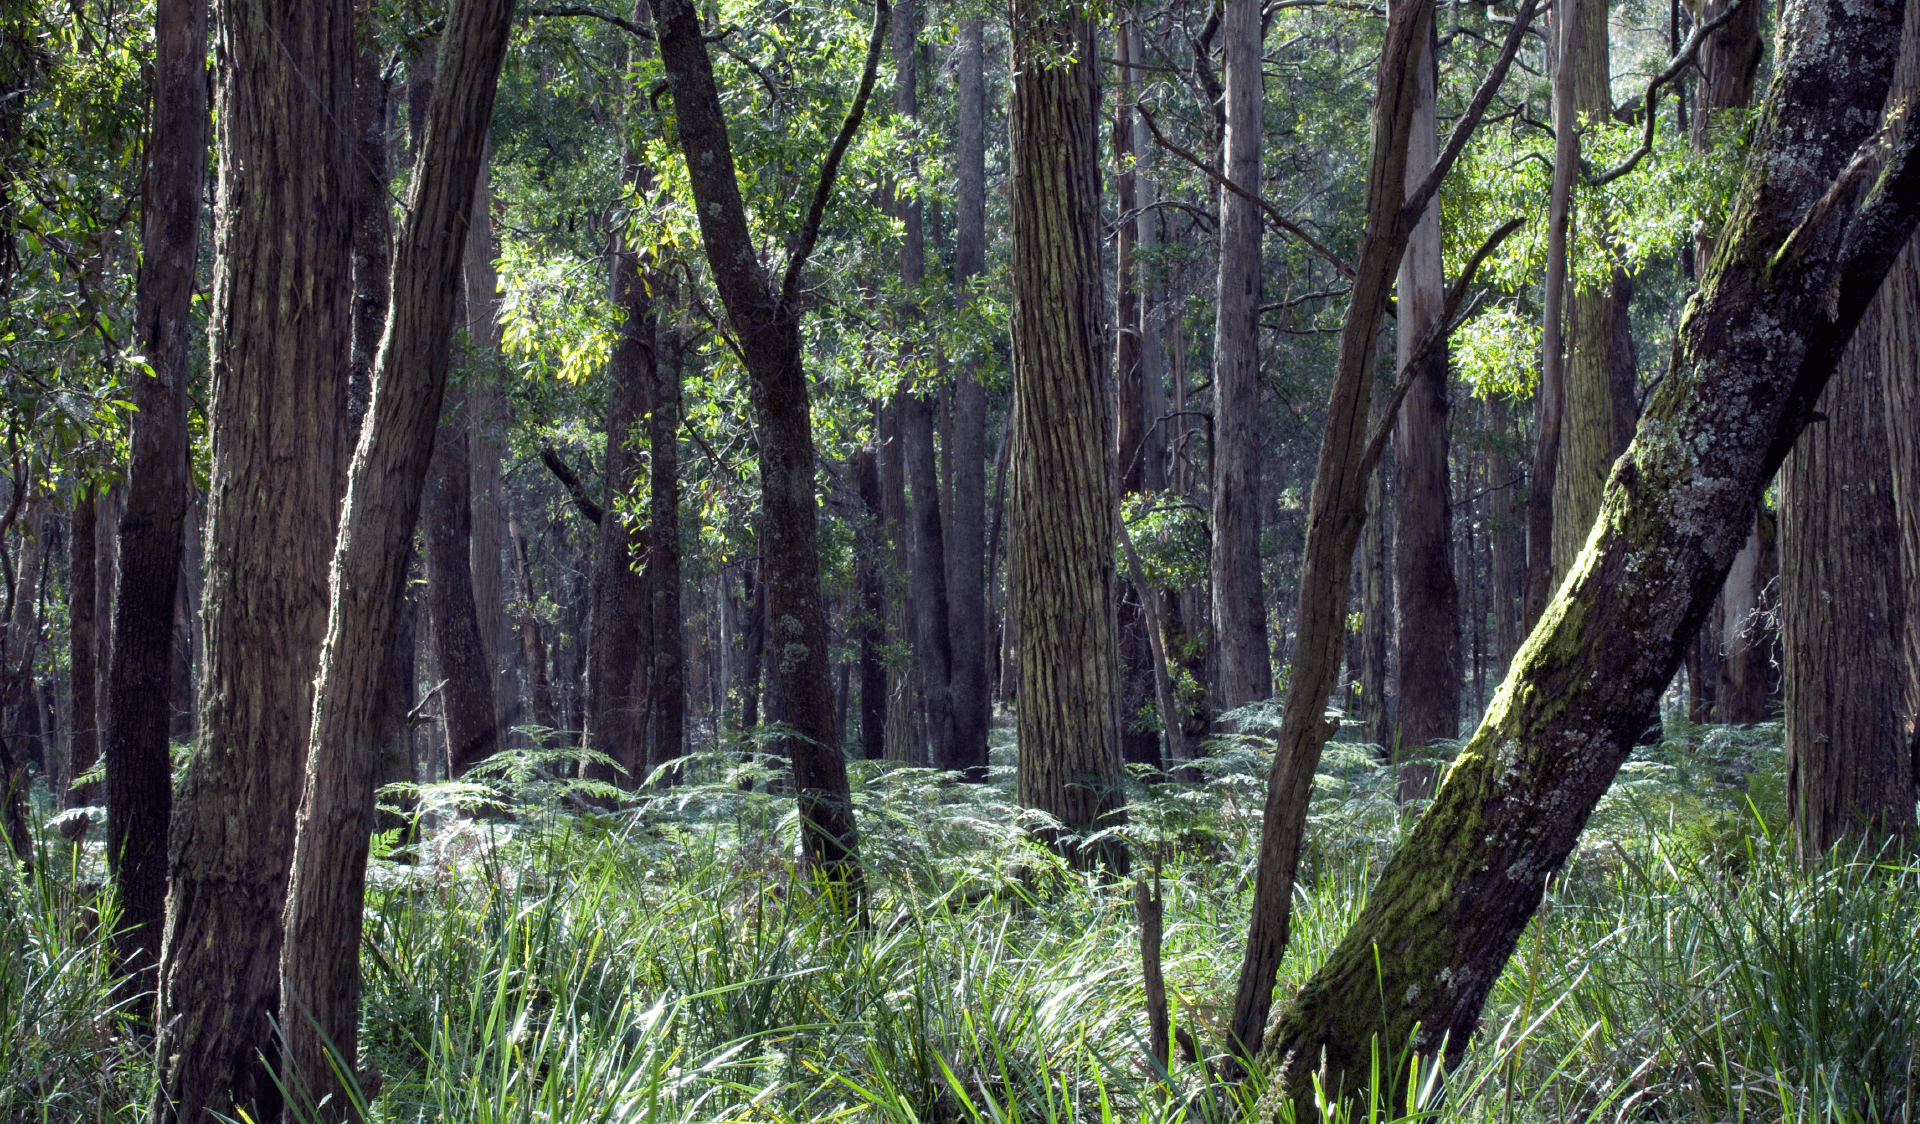 Forest scenery in the southern areas of the Hepburn Regional Park